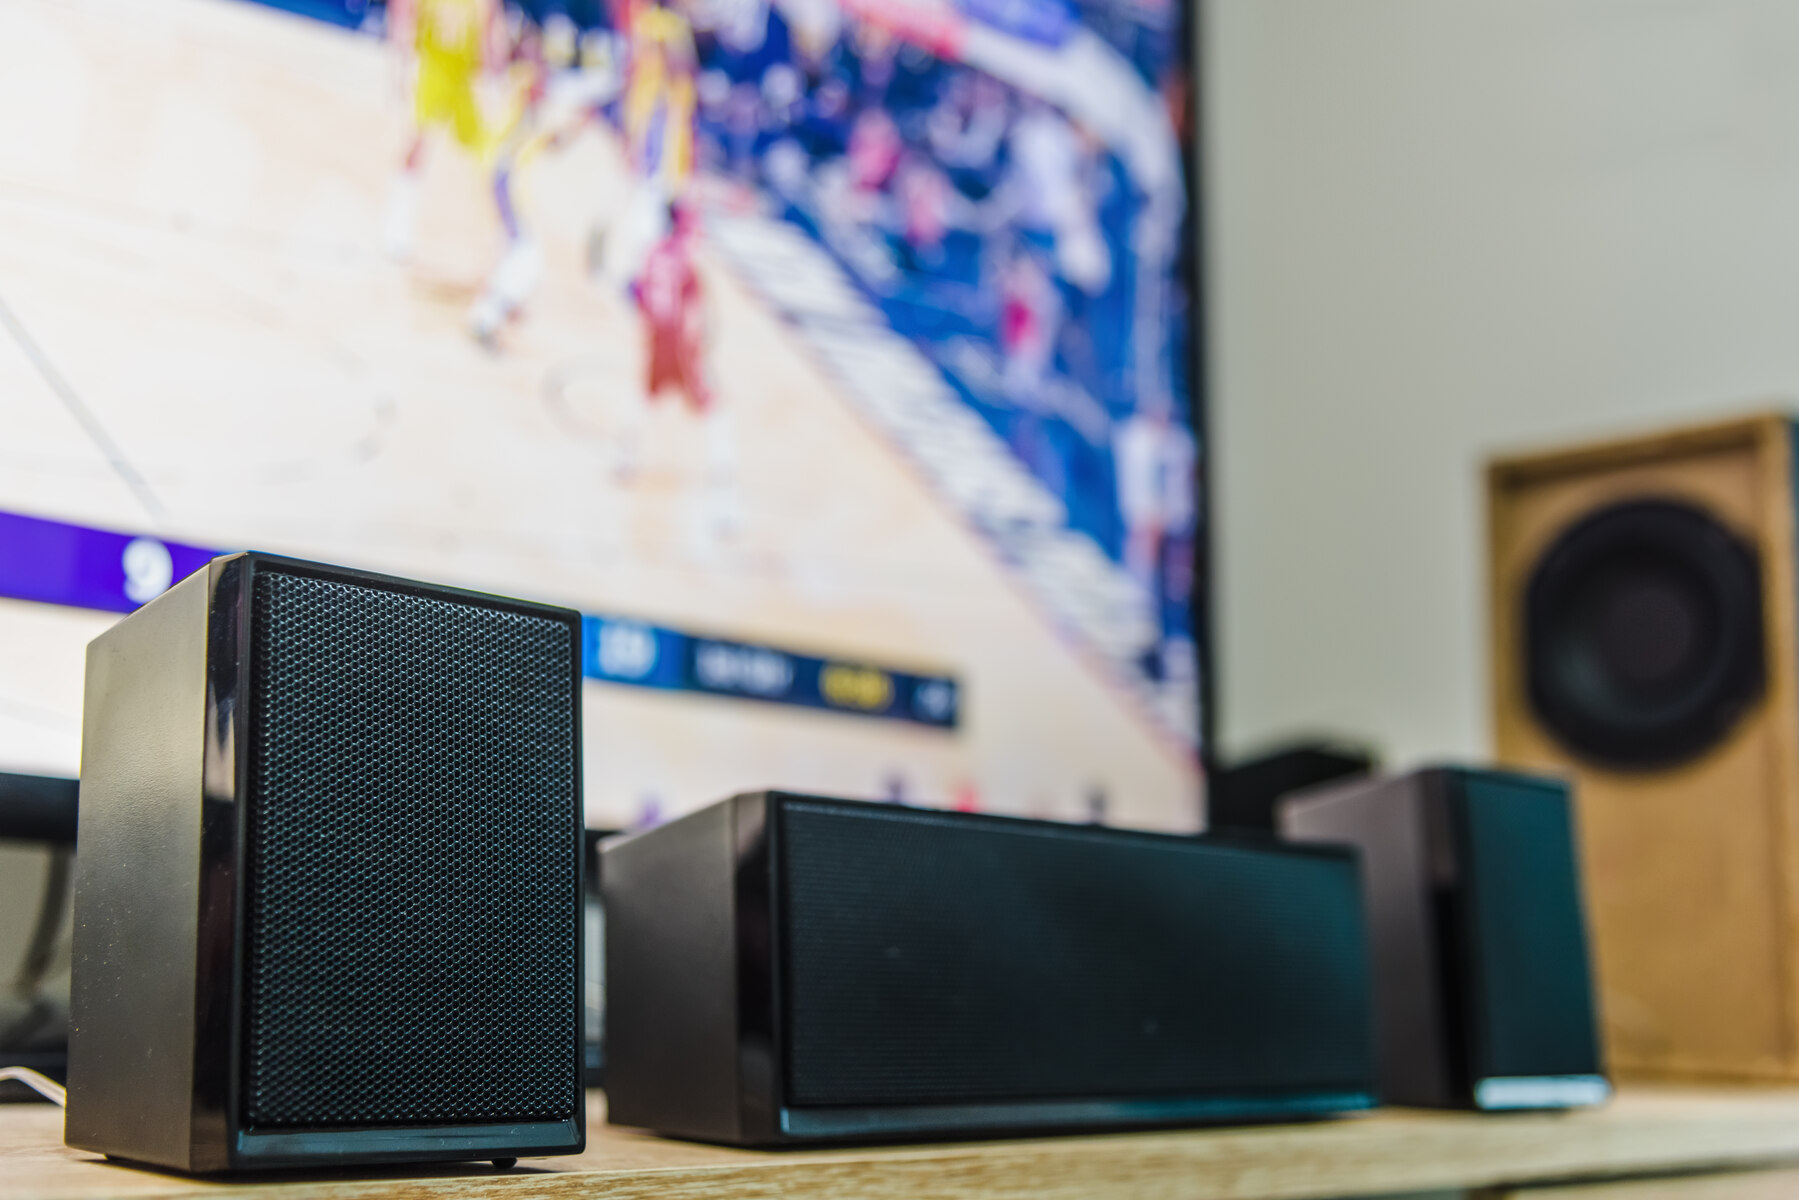 How To Connect A Surround Sound System To A Samsung Smart TV